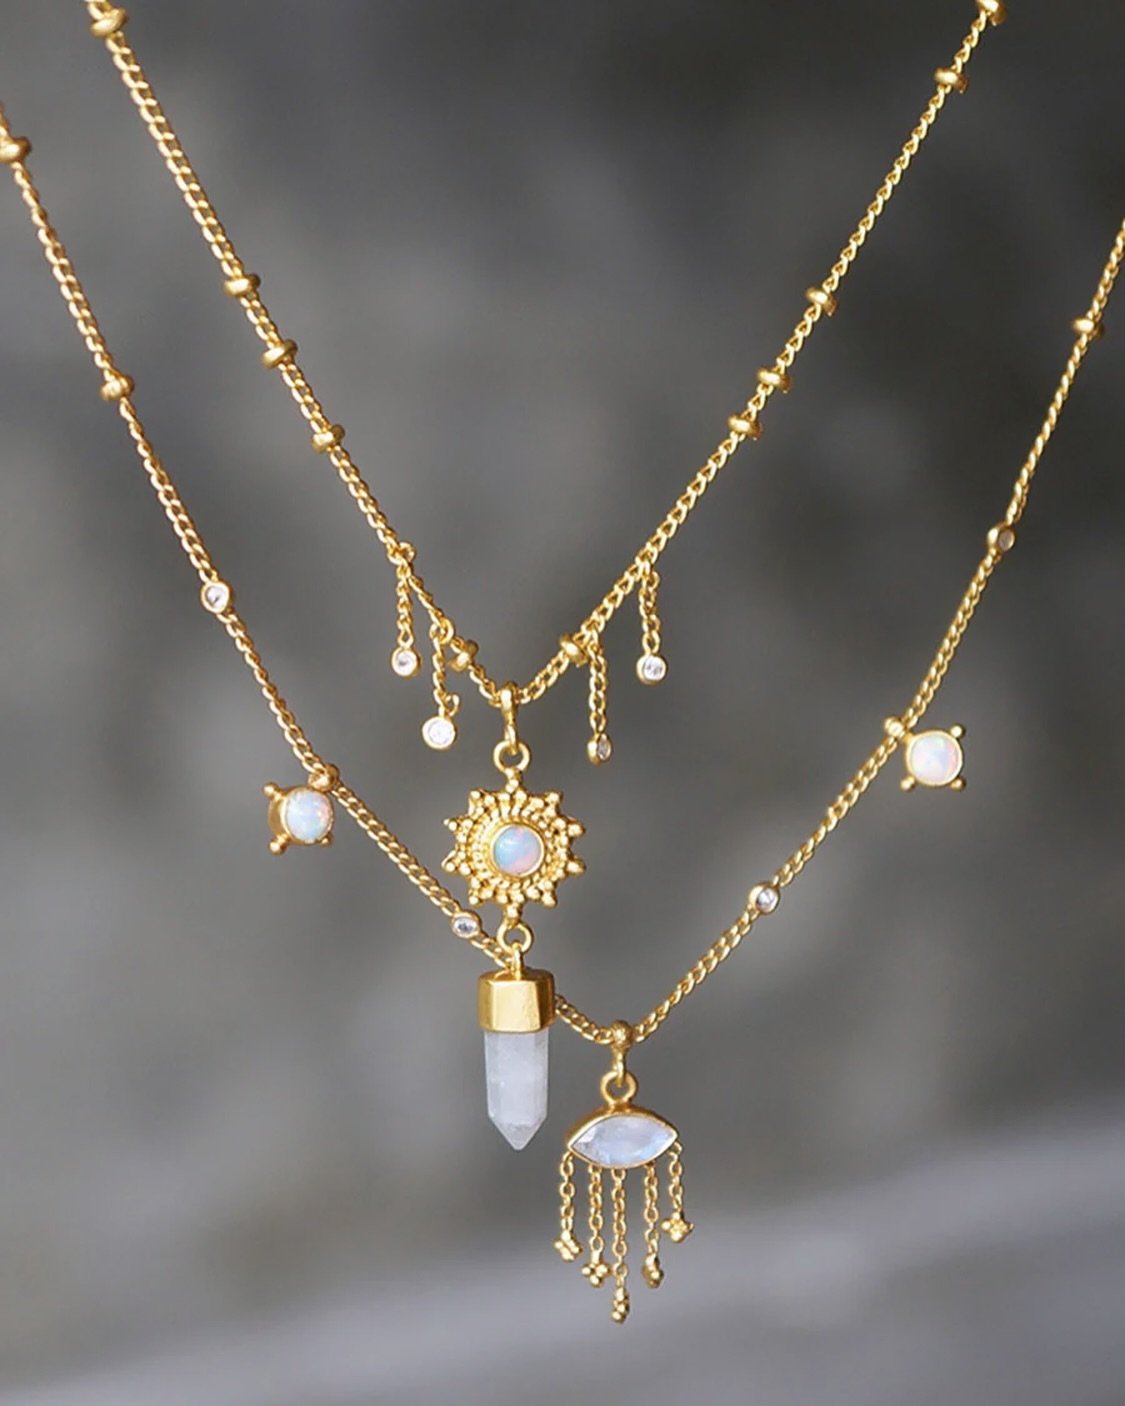 I&rsquo;m in love 🌟 it&rsquo;s true!! 🤭 The Horizon necklace contains the whole universe&hellip; A shining sun, and a sky full of stars, are represented in this piece. We&rsquo;ve also added a rainbow moonstone crystal, to connect you to the magic 